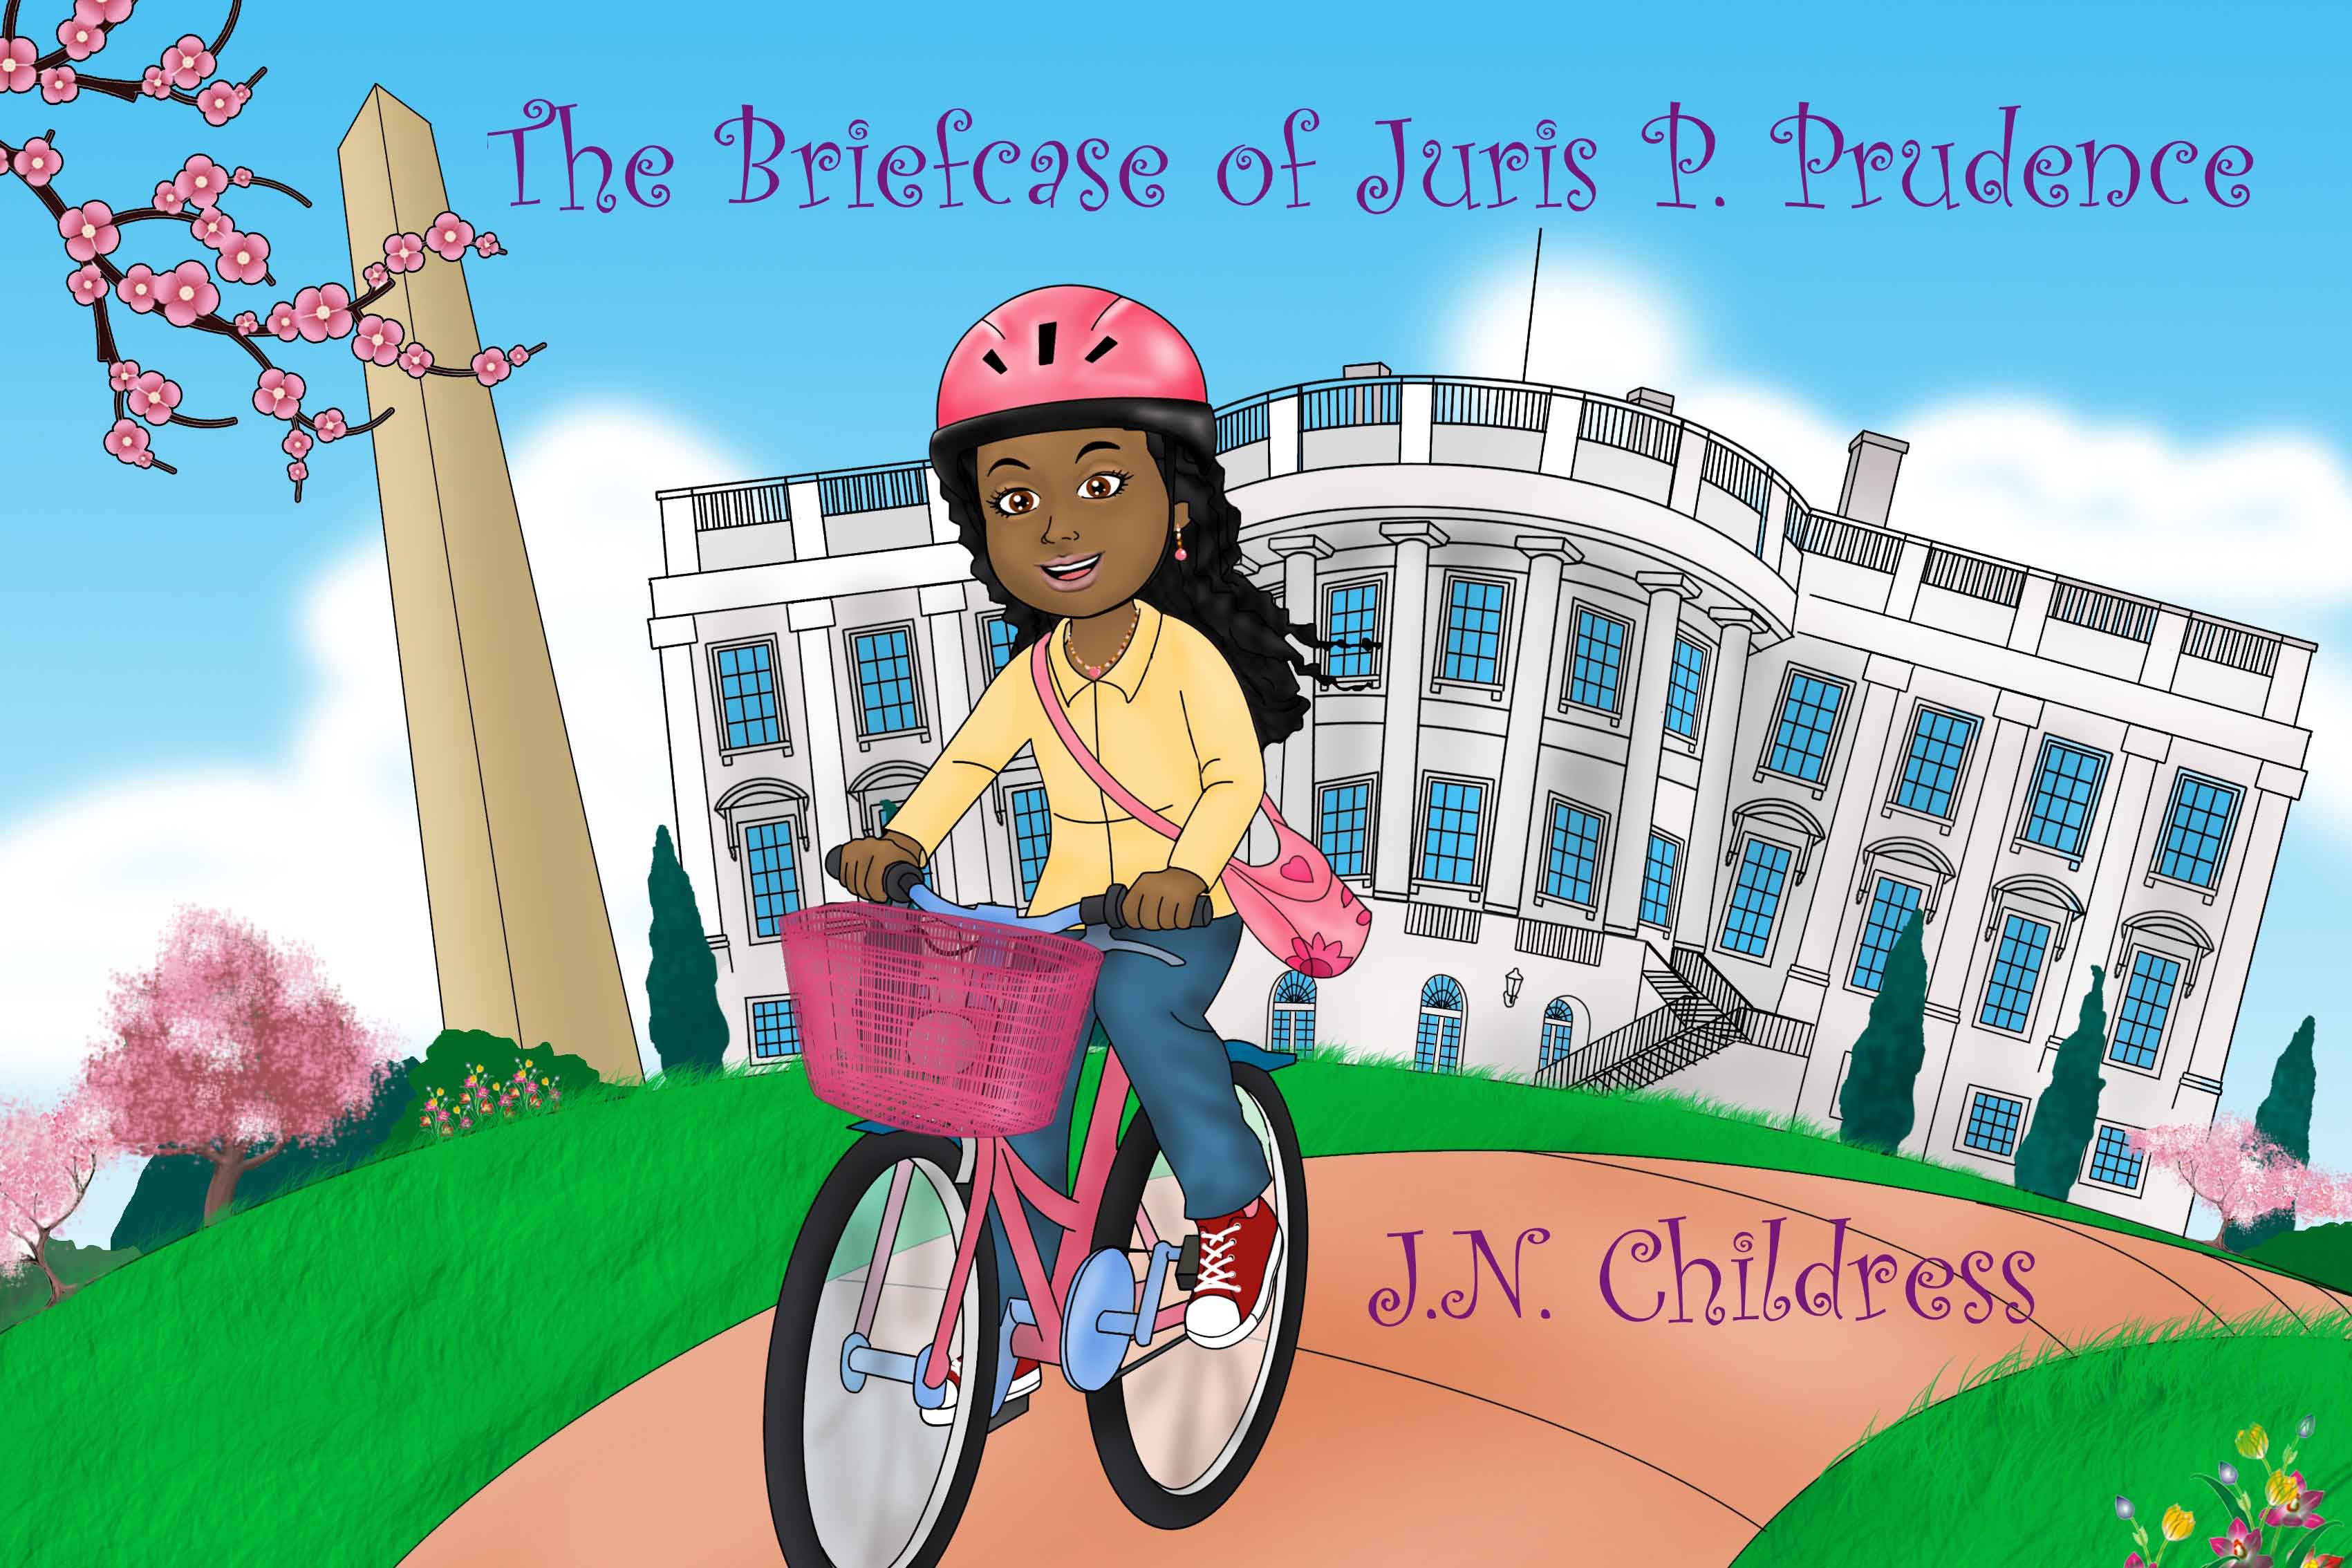 Book cover reads: The Briefcase of Juris P. Prudence by J.N. Childress